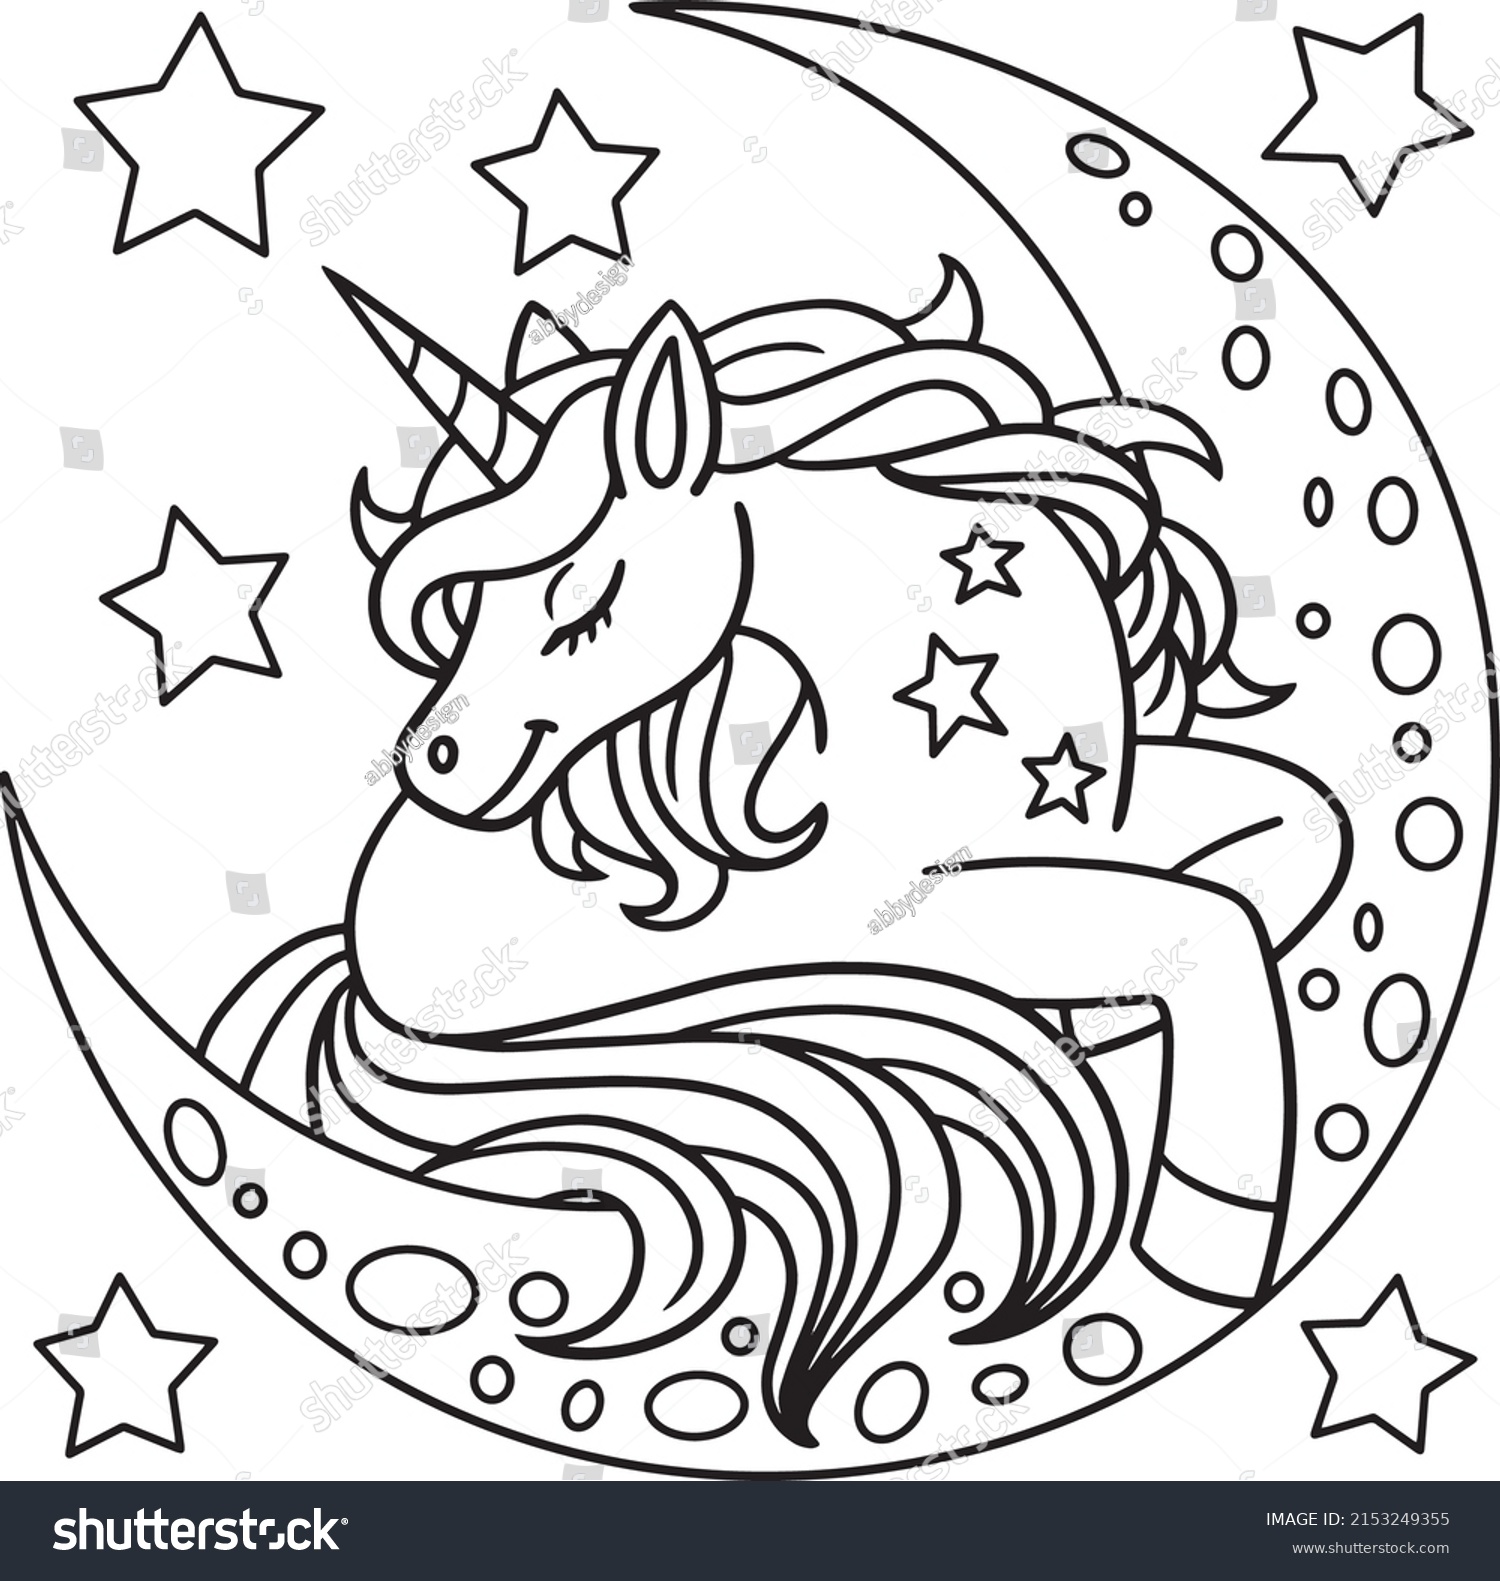 Unicorn Sleeping On Moon Coloring Page Stock Vector (Royalty Free ...